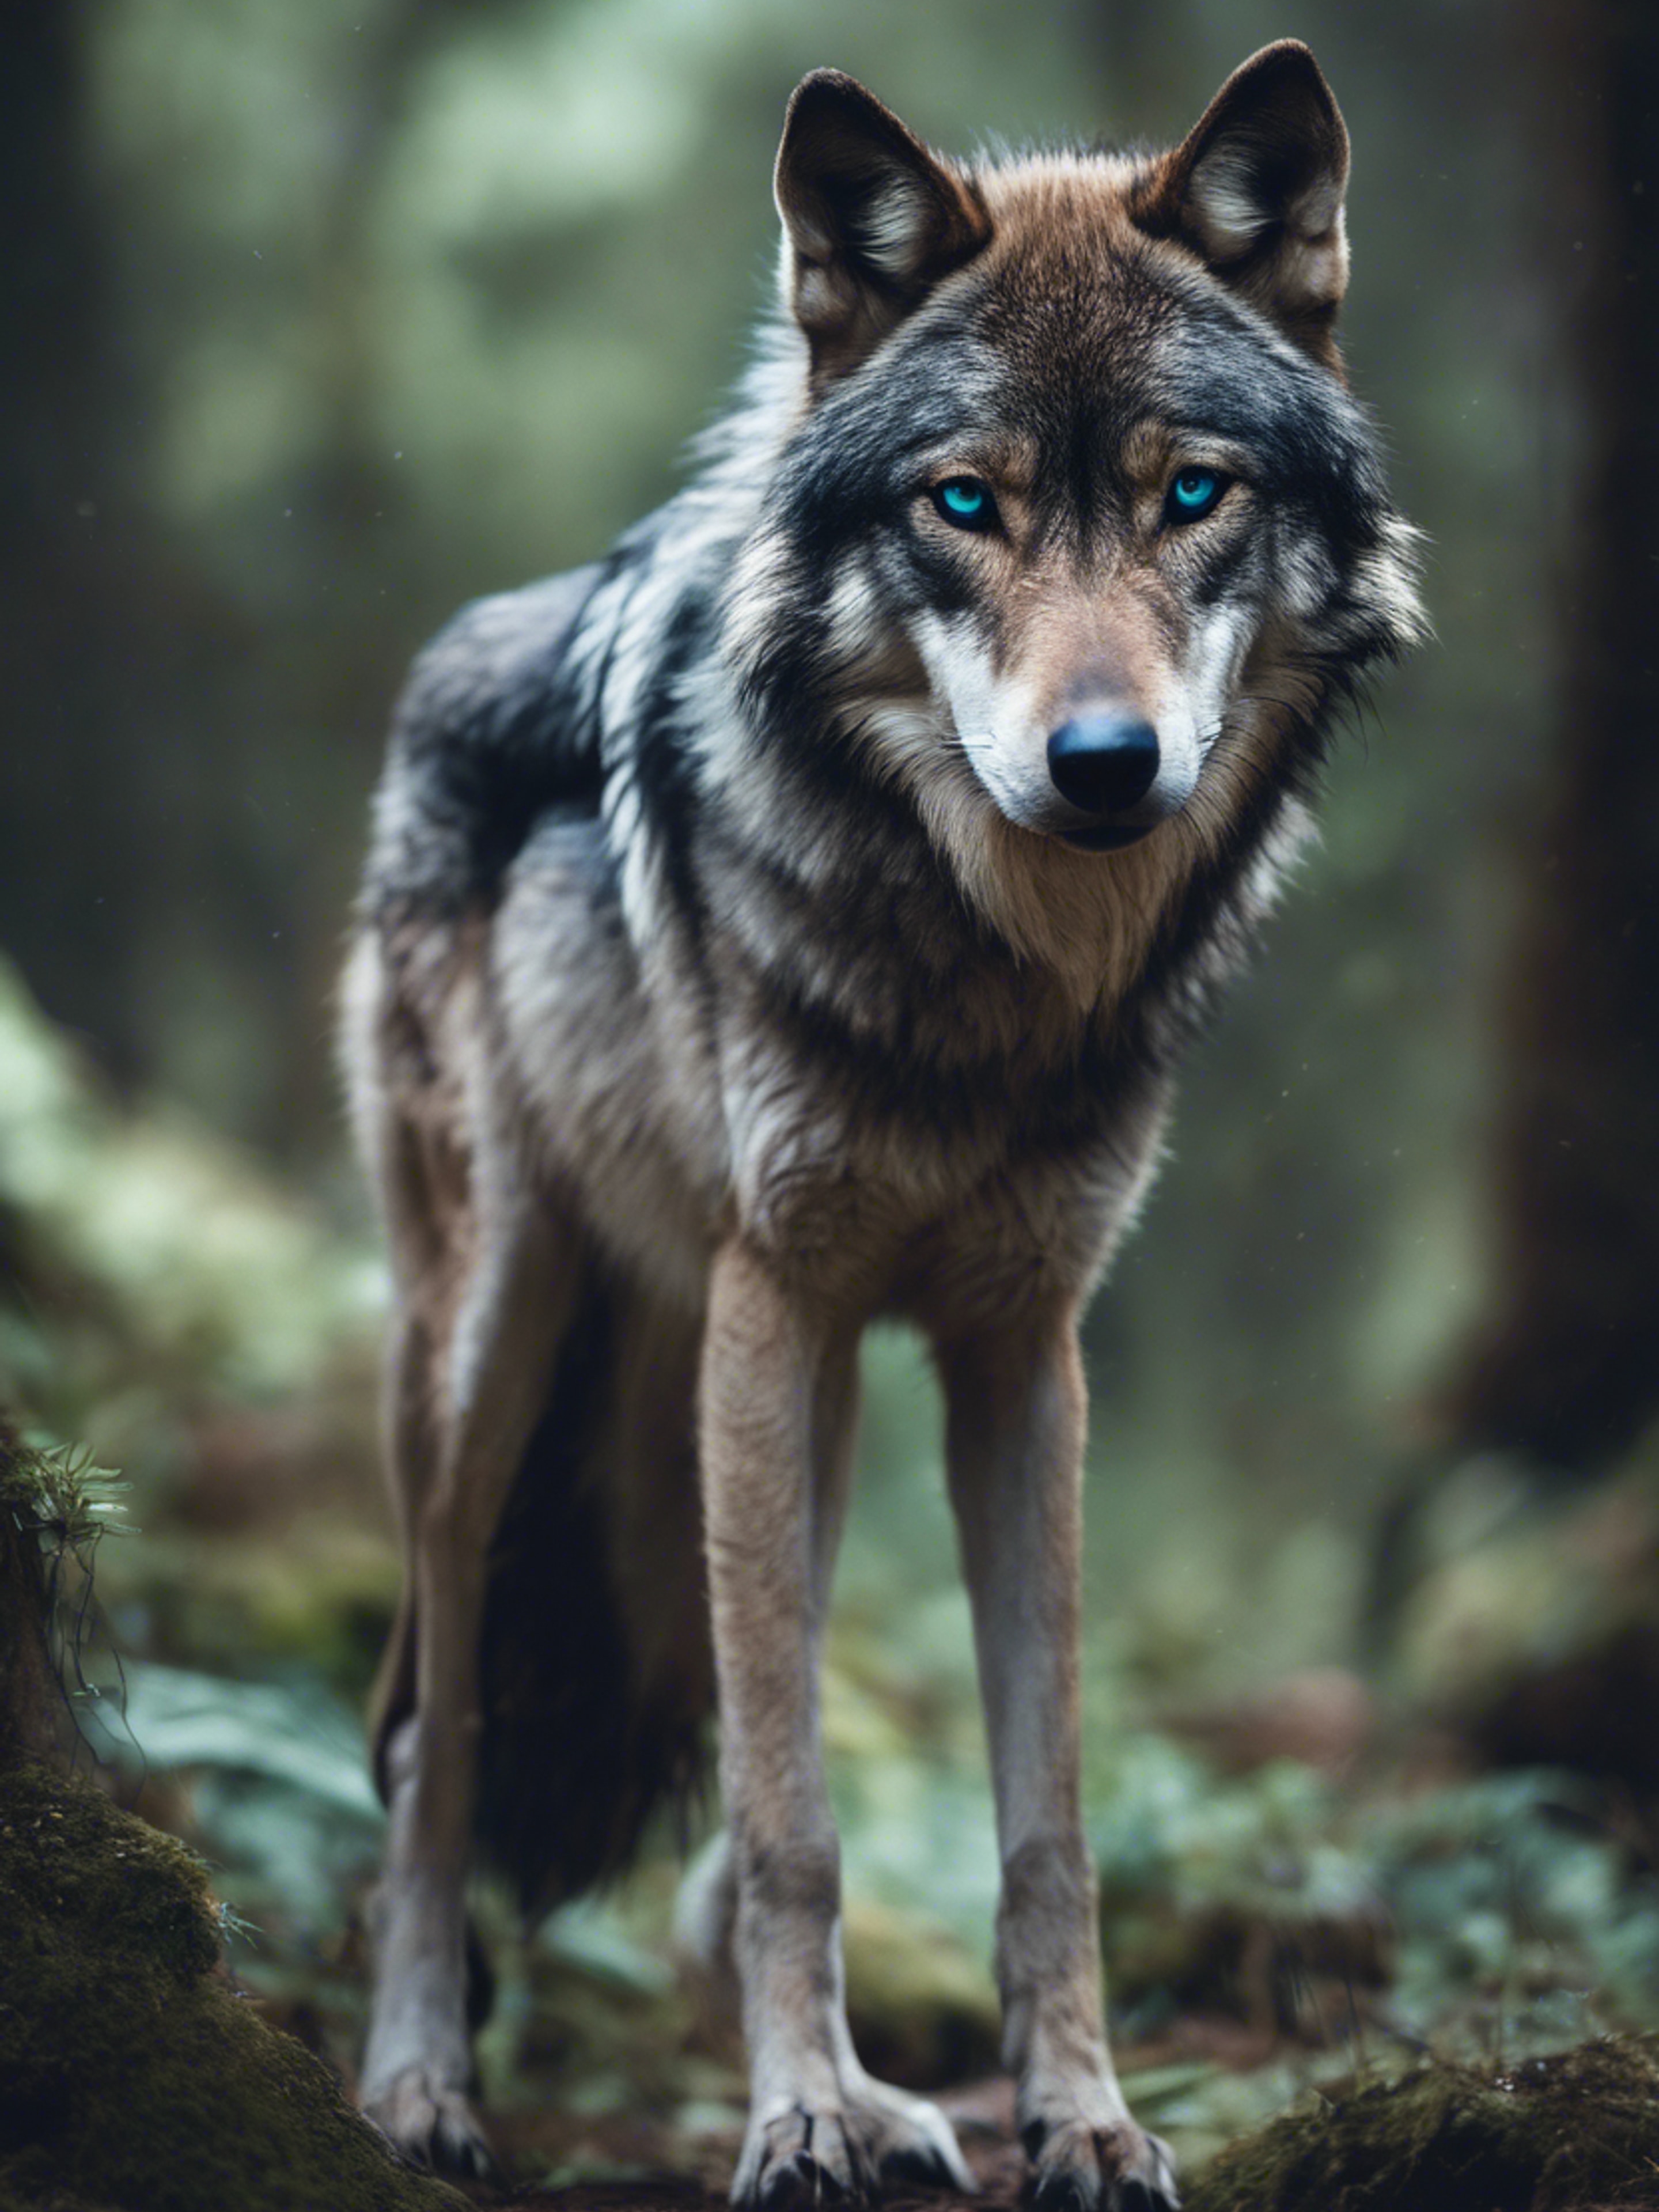 A lone Gothic wolf with teal eyes prowling through the darkness of an ancient forest. Валлпапер[a9217c08a86544208905]